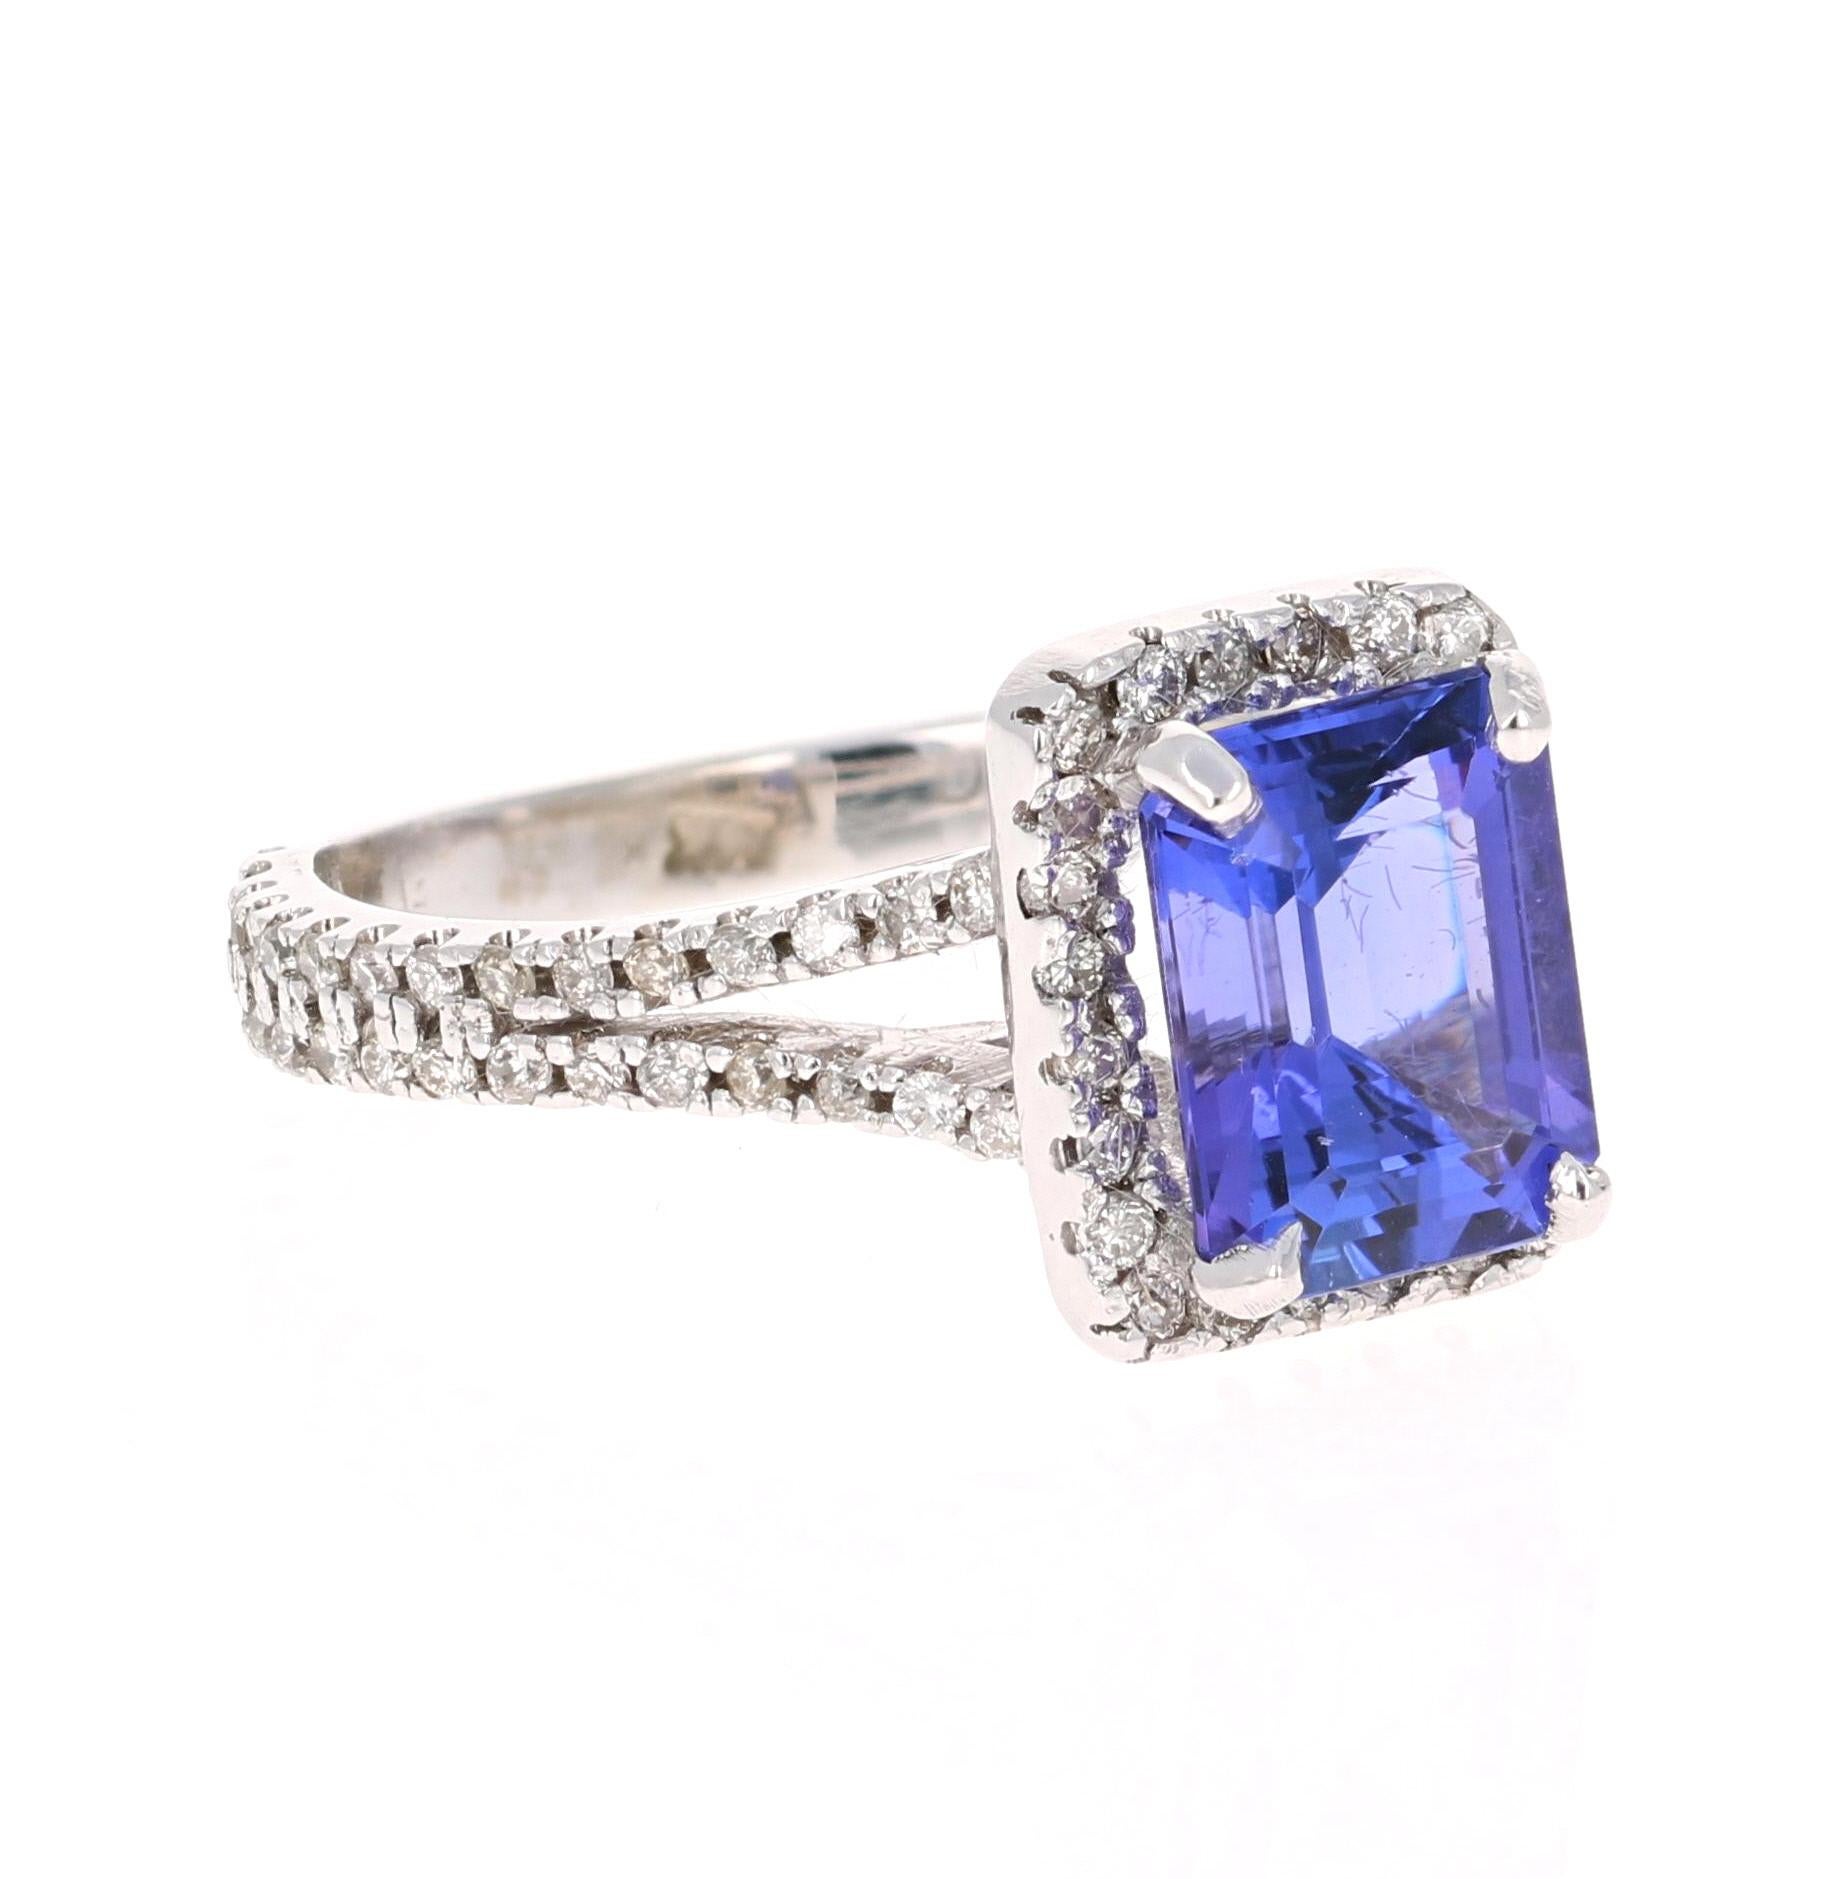 A gorgeous 2.65 Carat Tanzanite and Diamond Ring that can easily transform into a unique Engagement Ring for that special someone!

The Tanzanite is an Emerald cut stone that weighs 1.97 Carats.  The ring is surrounded by 54 Round Brilliant Cut